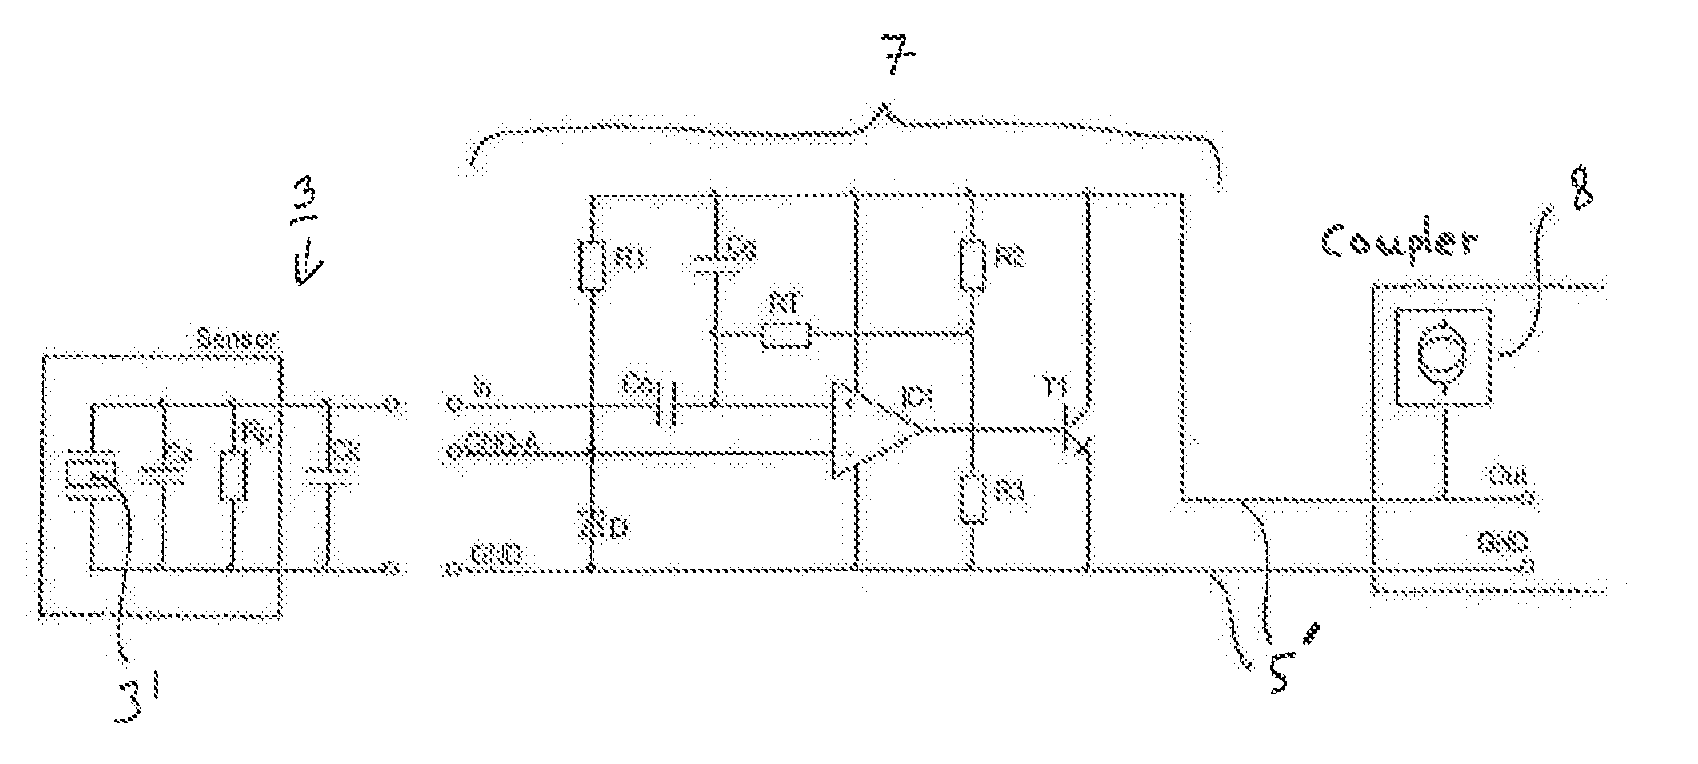 Electronic circuit for a weight-in-motion sensor